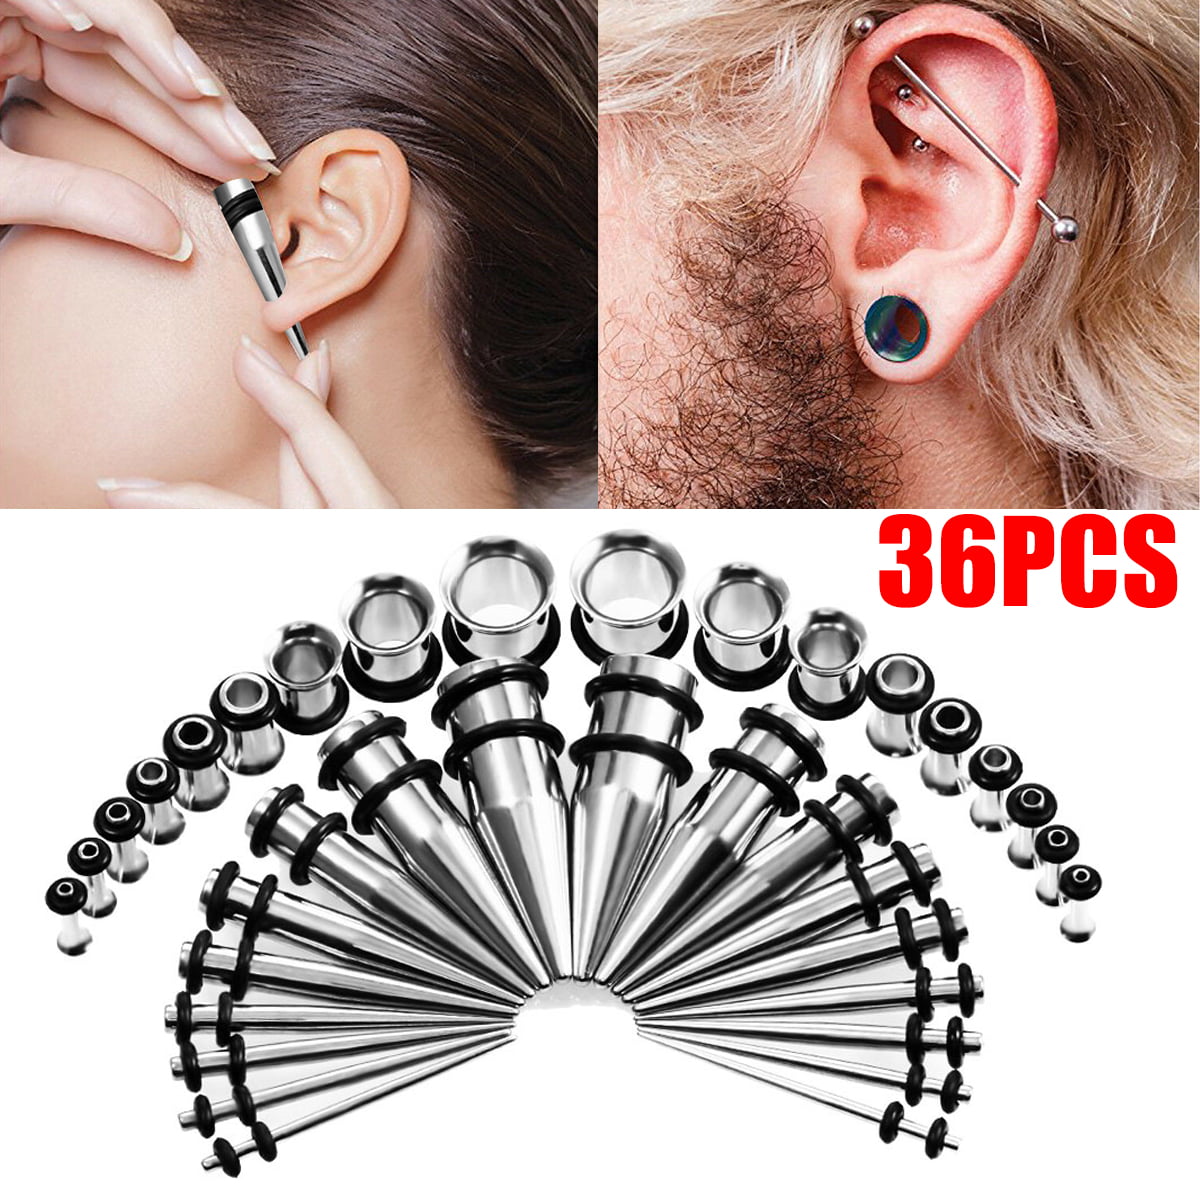 vcmart 14G-00G Ear Gauges Tapers and Tunnels Gauge Stretching Kit O-Rings Included 316L Stainless Steel Gauging Plugs